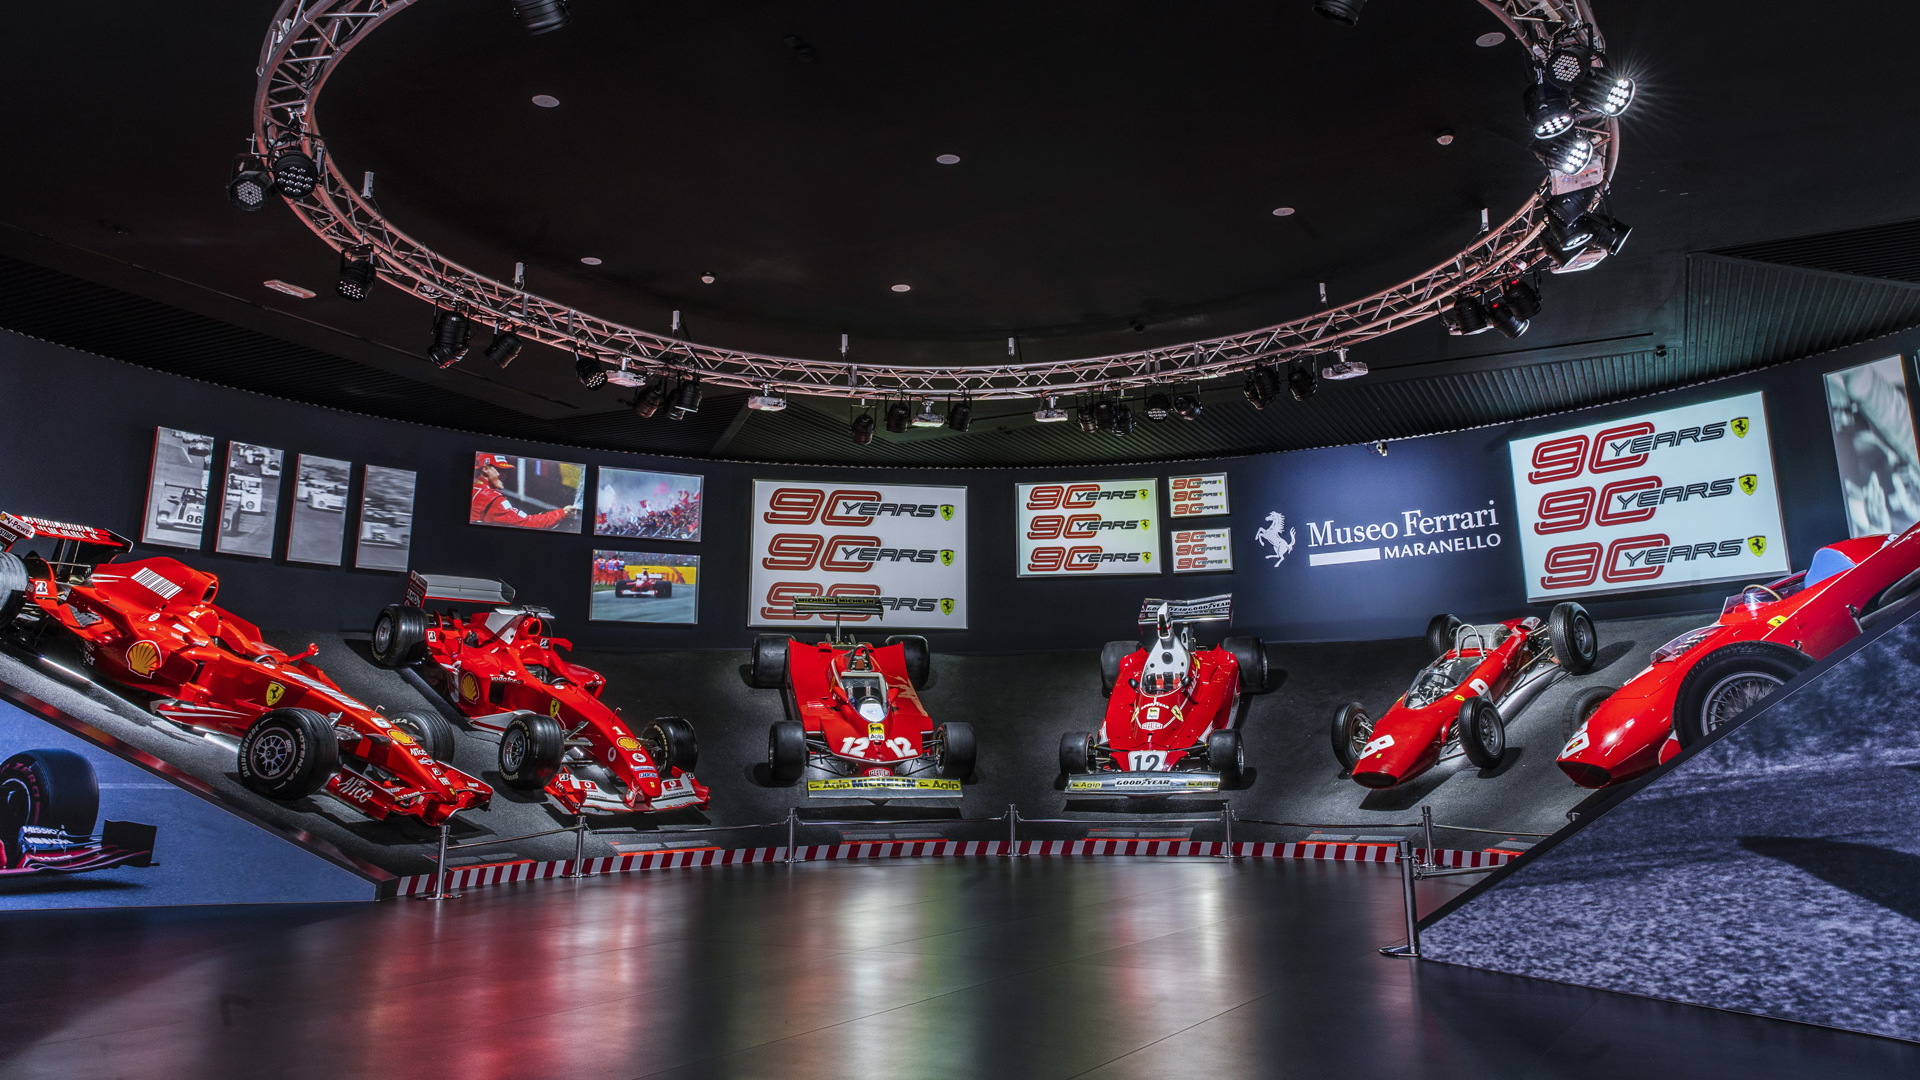 “90 Years Exhibition” at the Ferrari Museum in Maranello, Italy